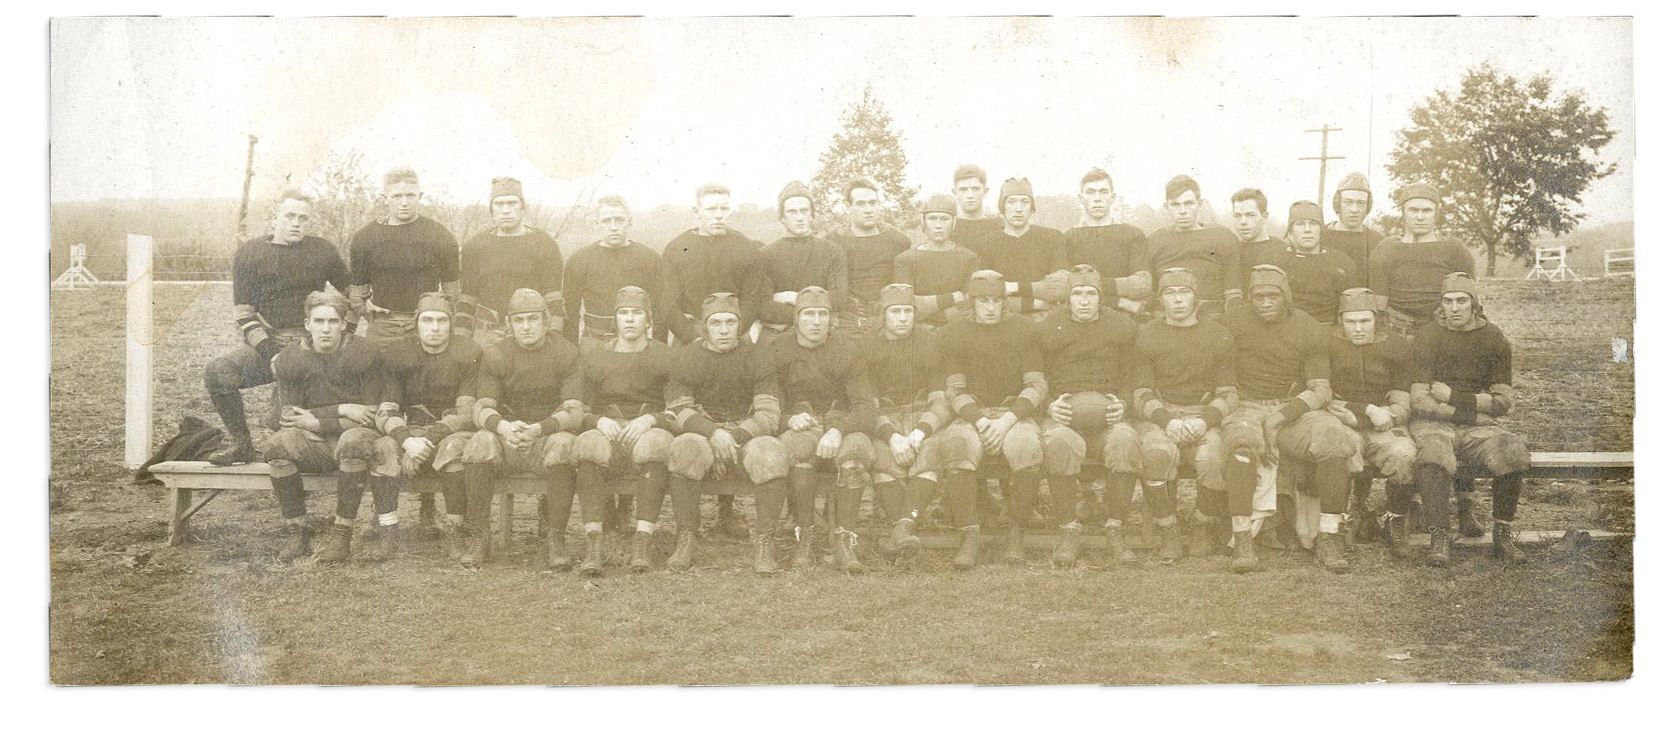 1917 Rutgers Team Photo with Paul Robeson